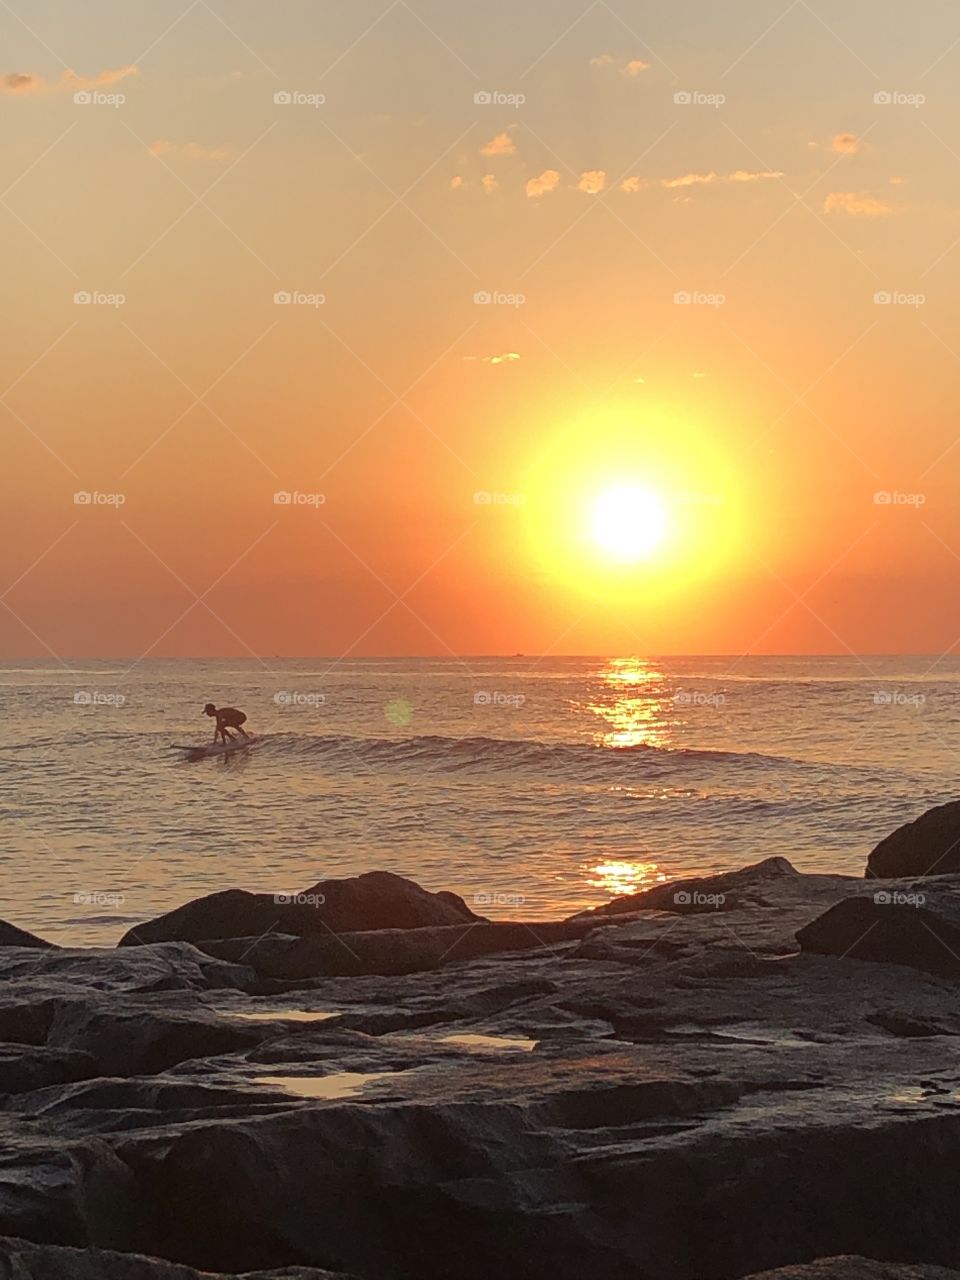 Surfer riding a wave under the sunrise on an August summer morning 